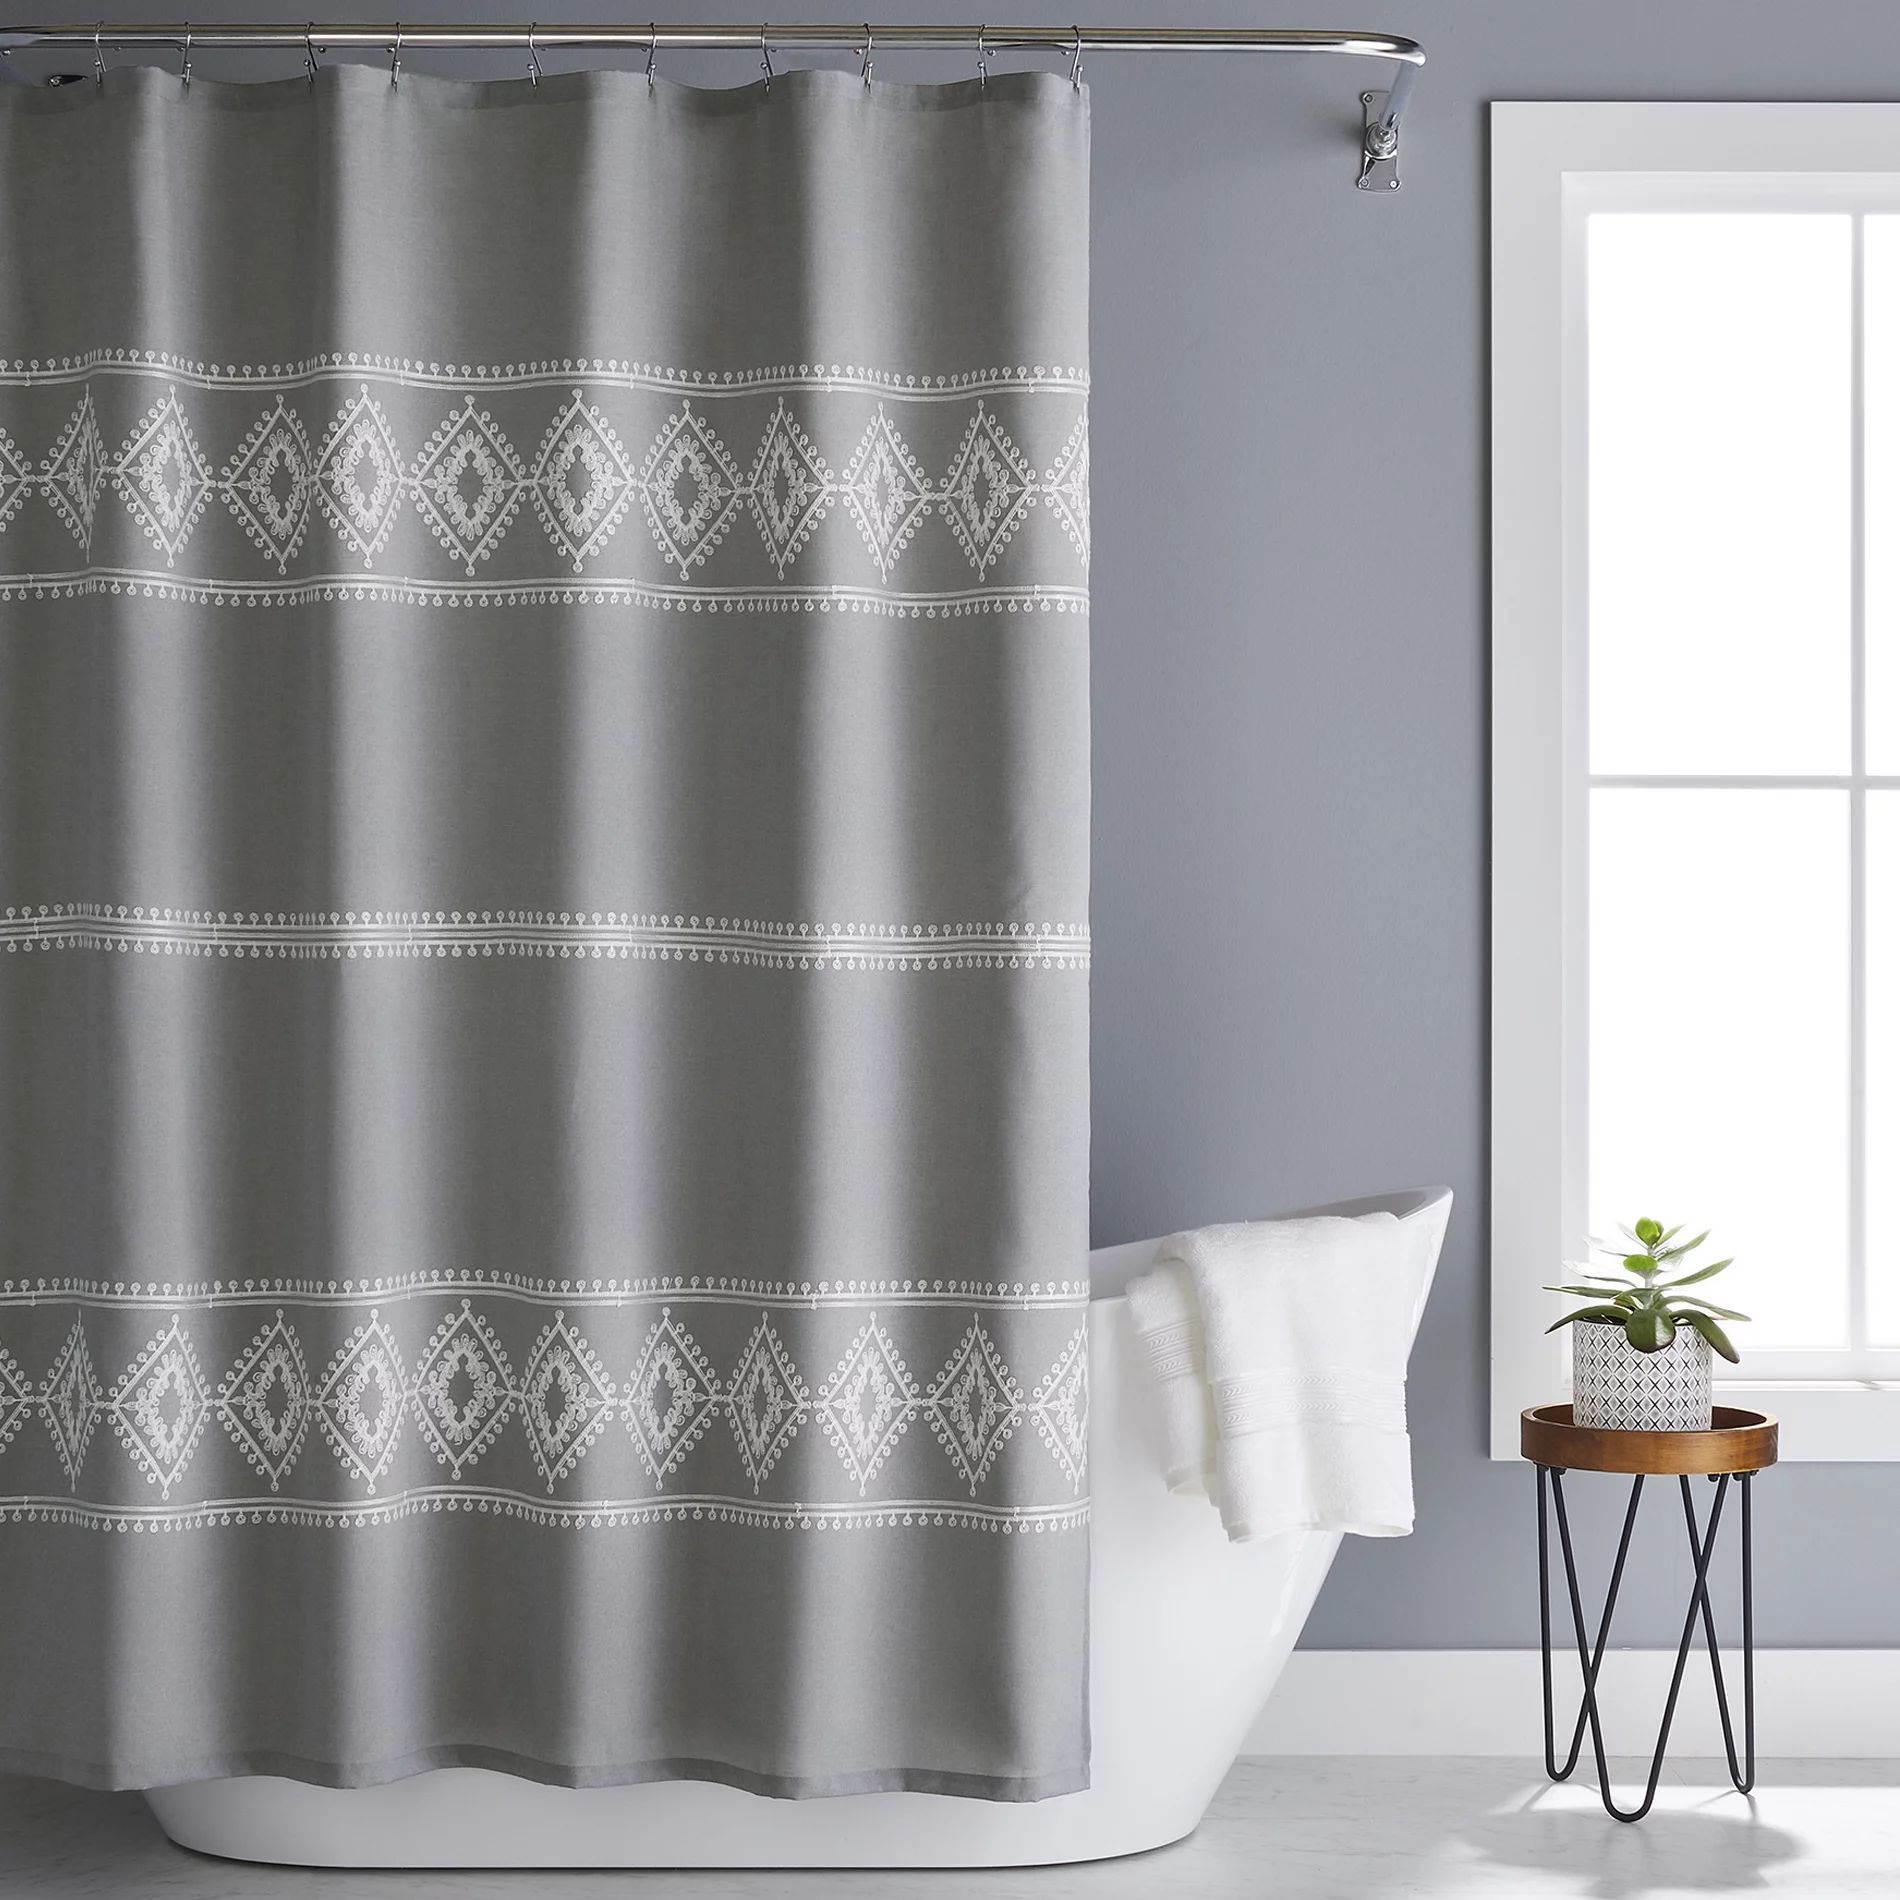 Better Homes & Gardens Embroidered Medallion Polyester Shower Curtain", 72" x 72", Grey | Walmart (US)